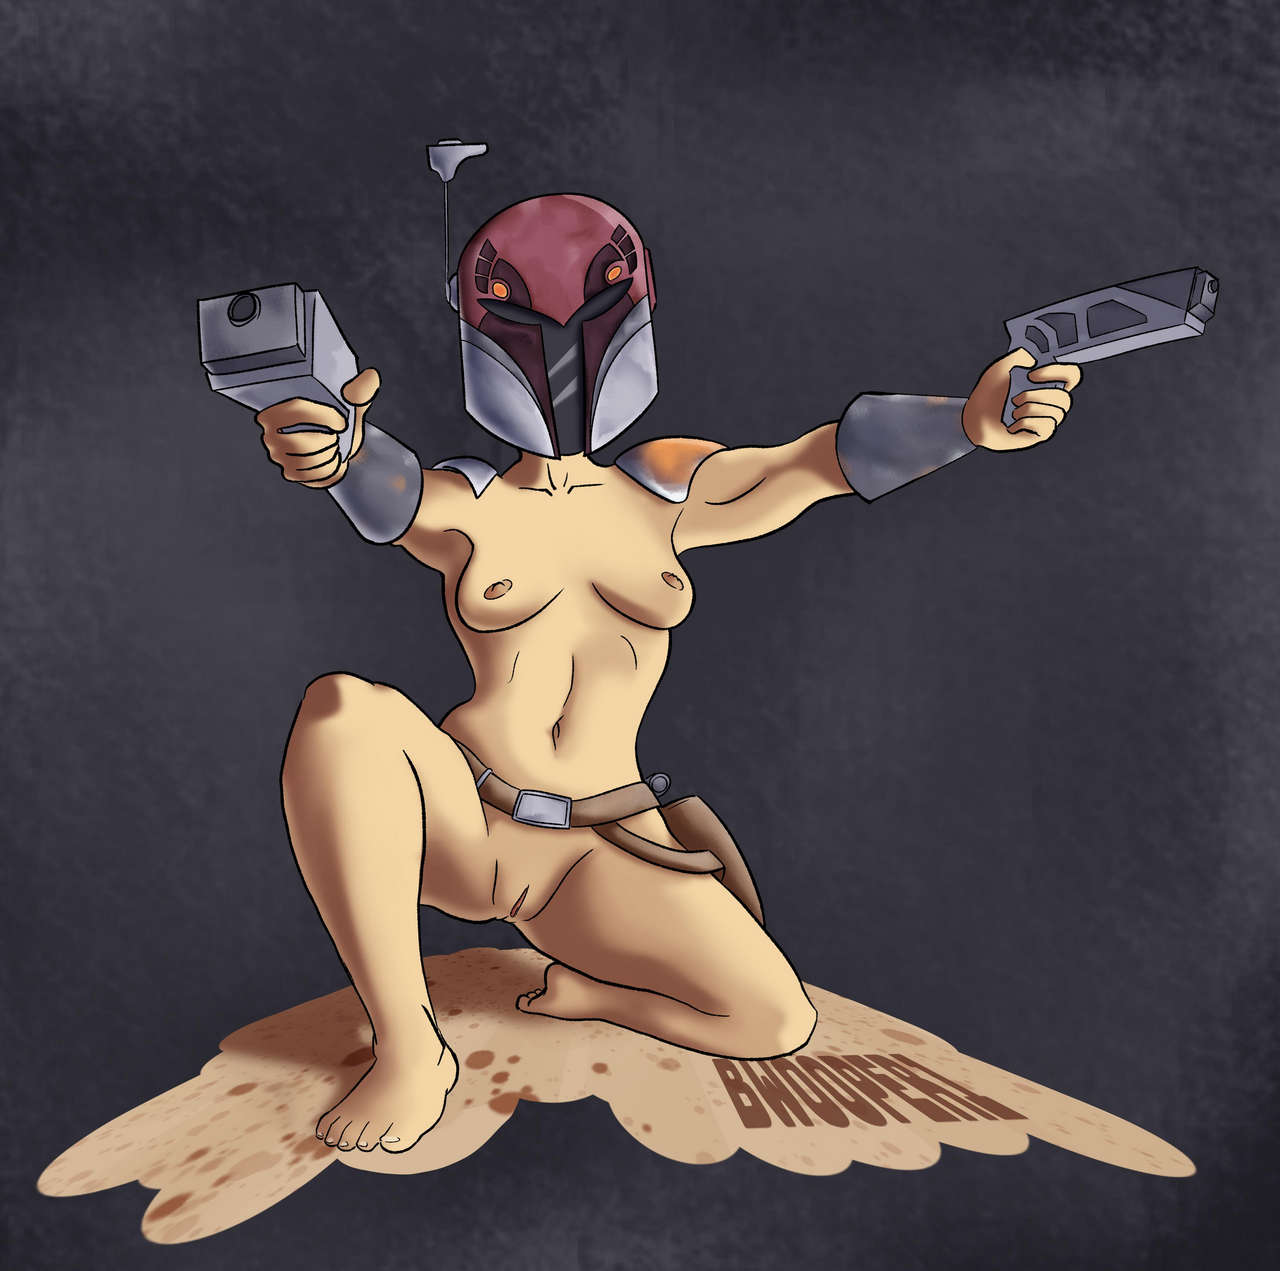 nsfw cosplay nudes like that gallery featuring Sabine Wren Posing - check c...